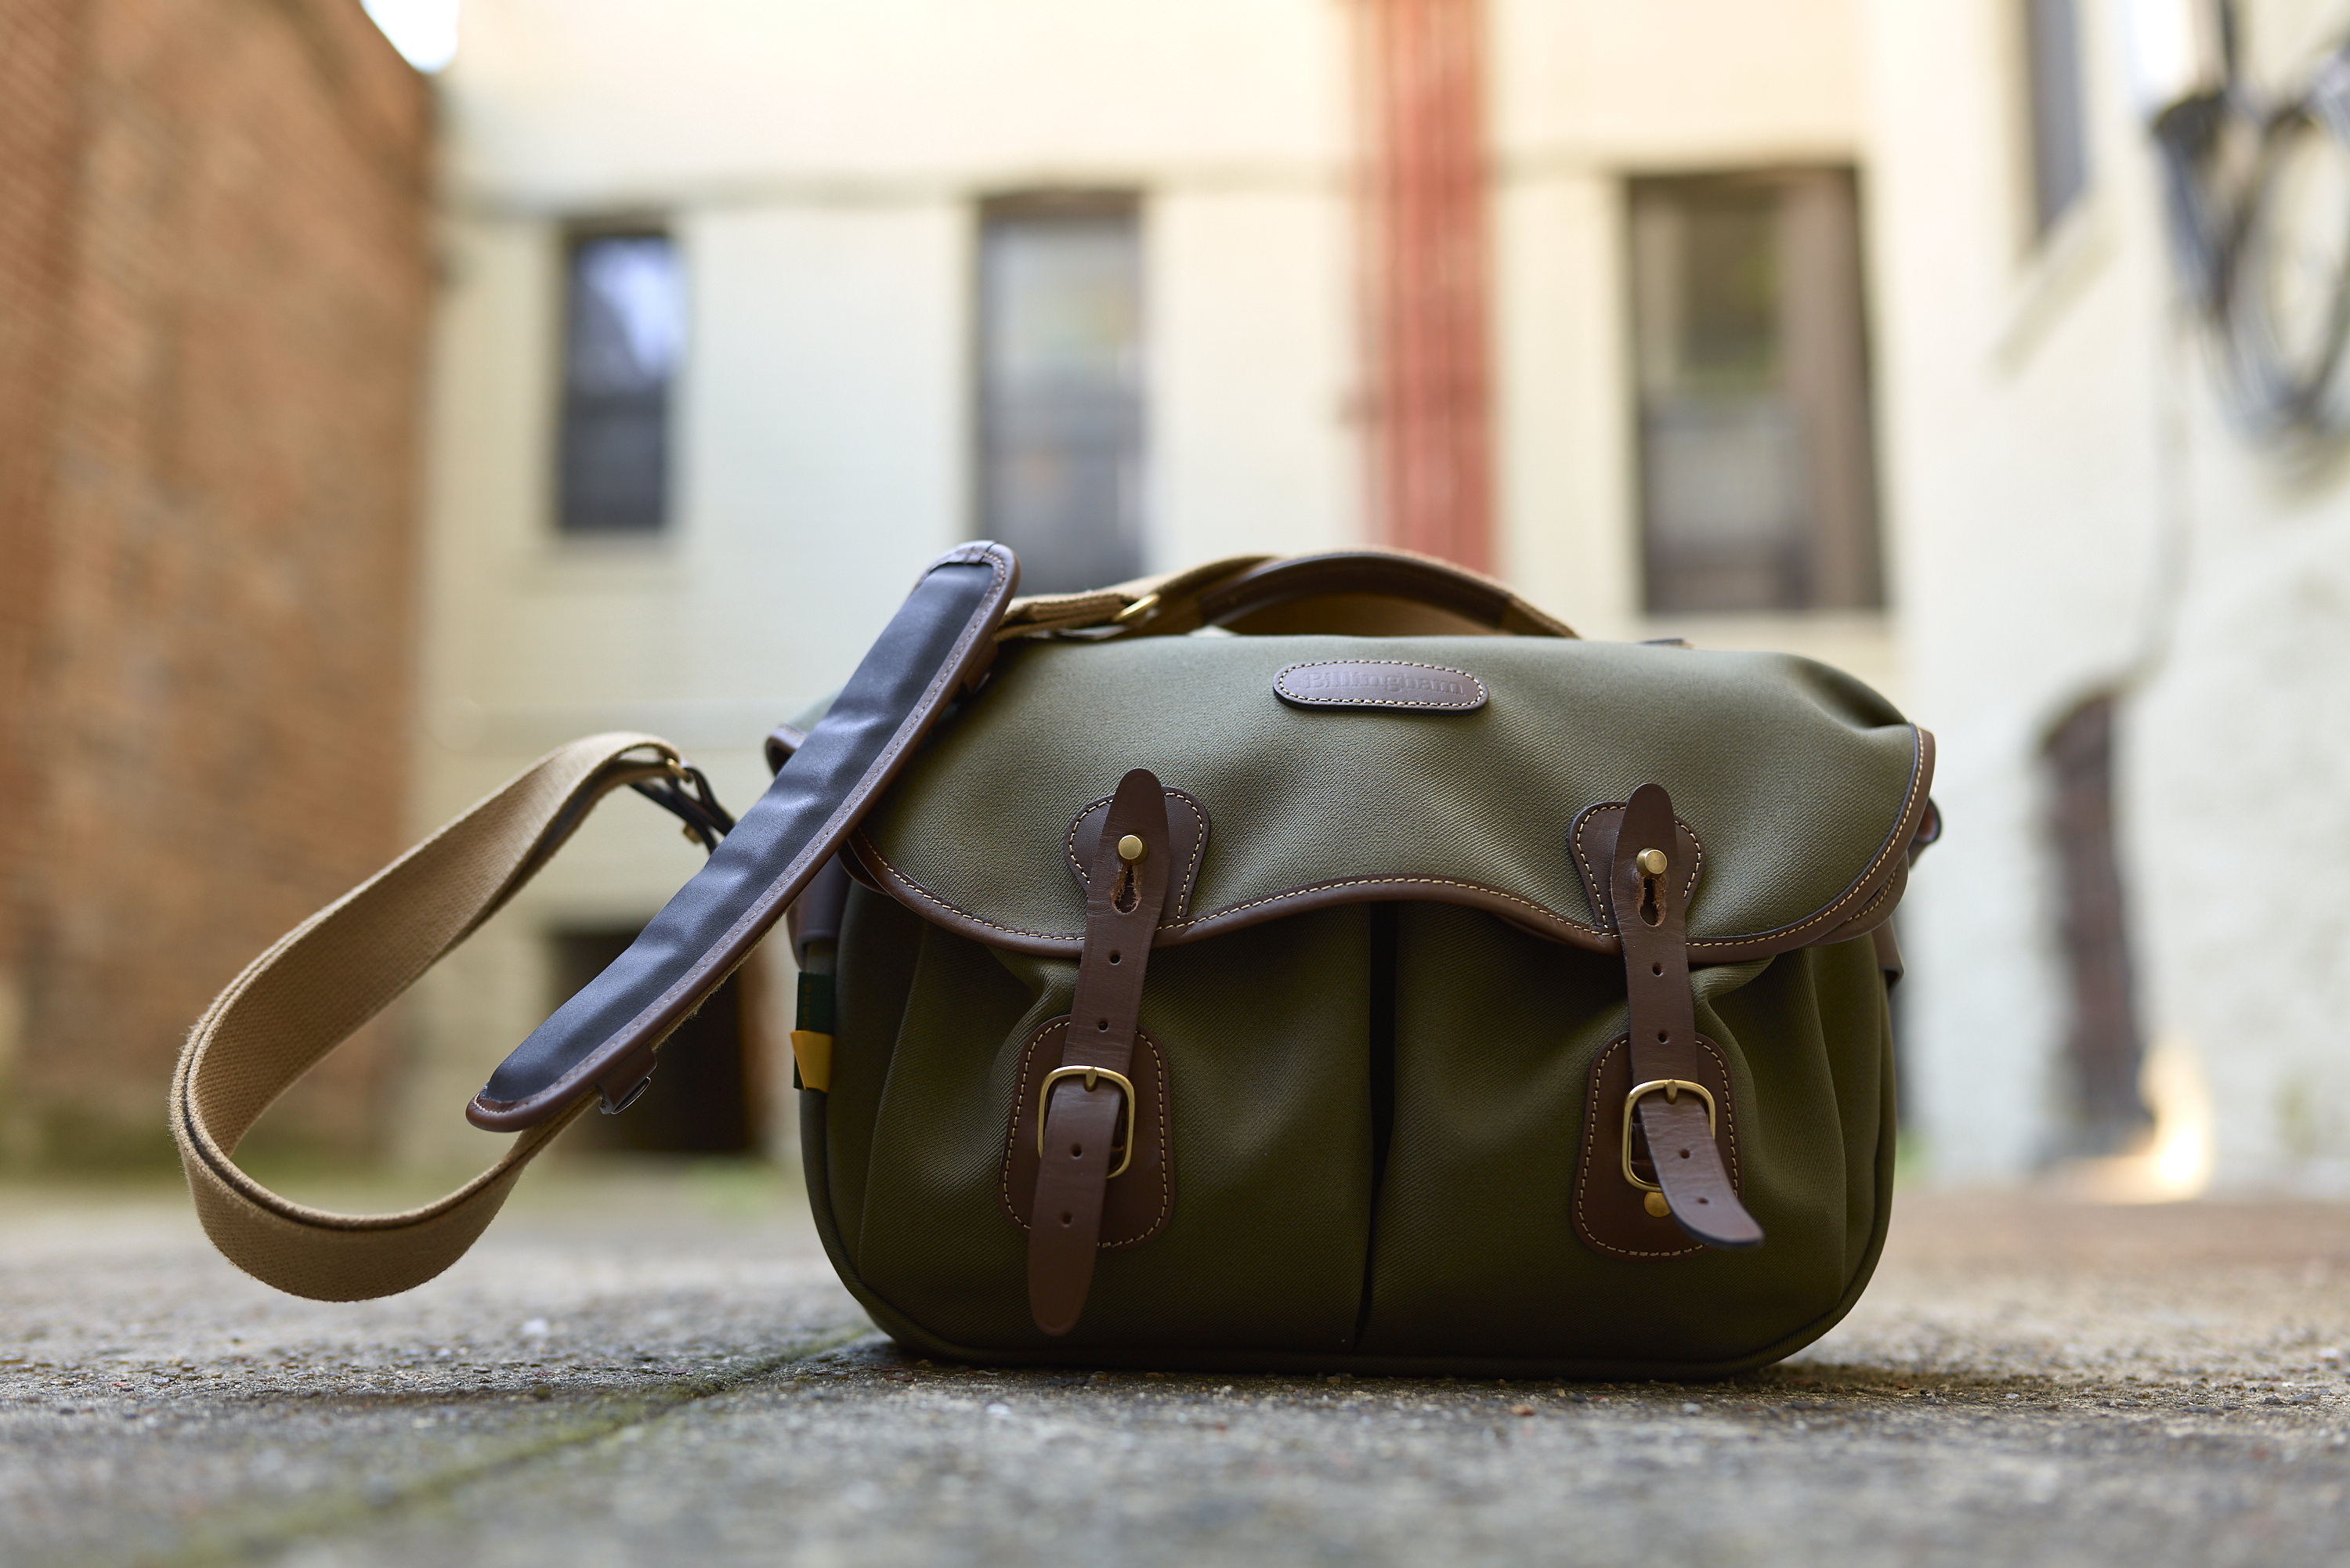 The Complete Confusion of the Modern Camera Bag Industry